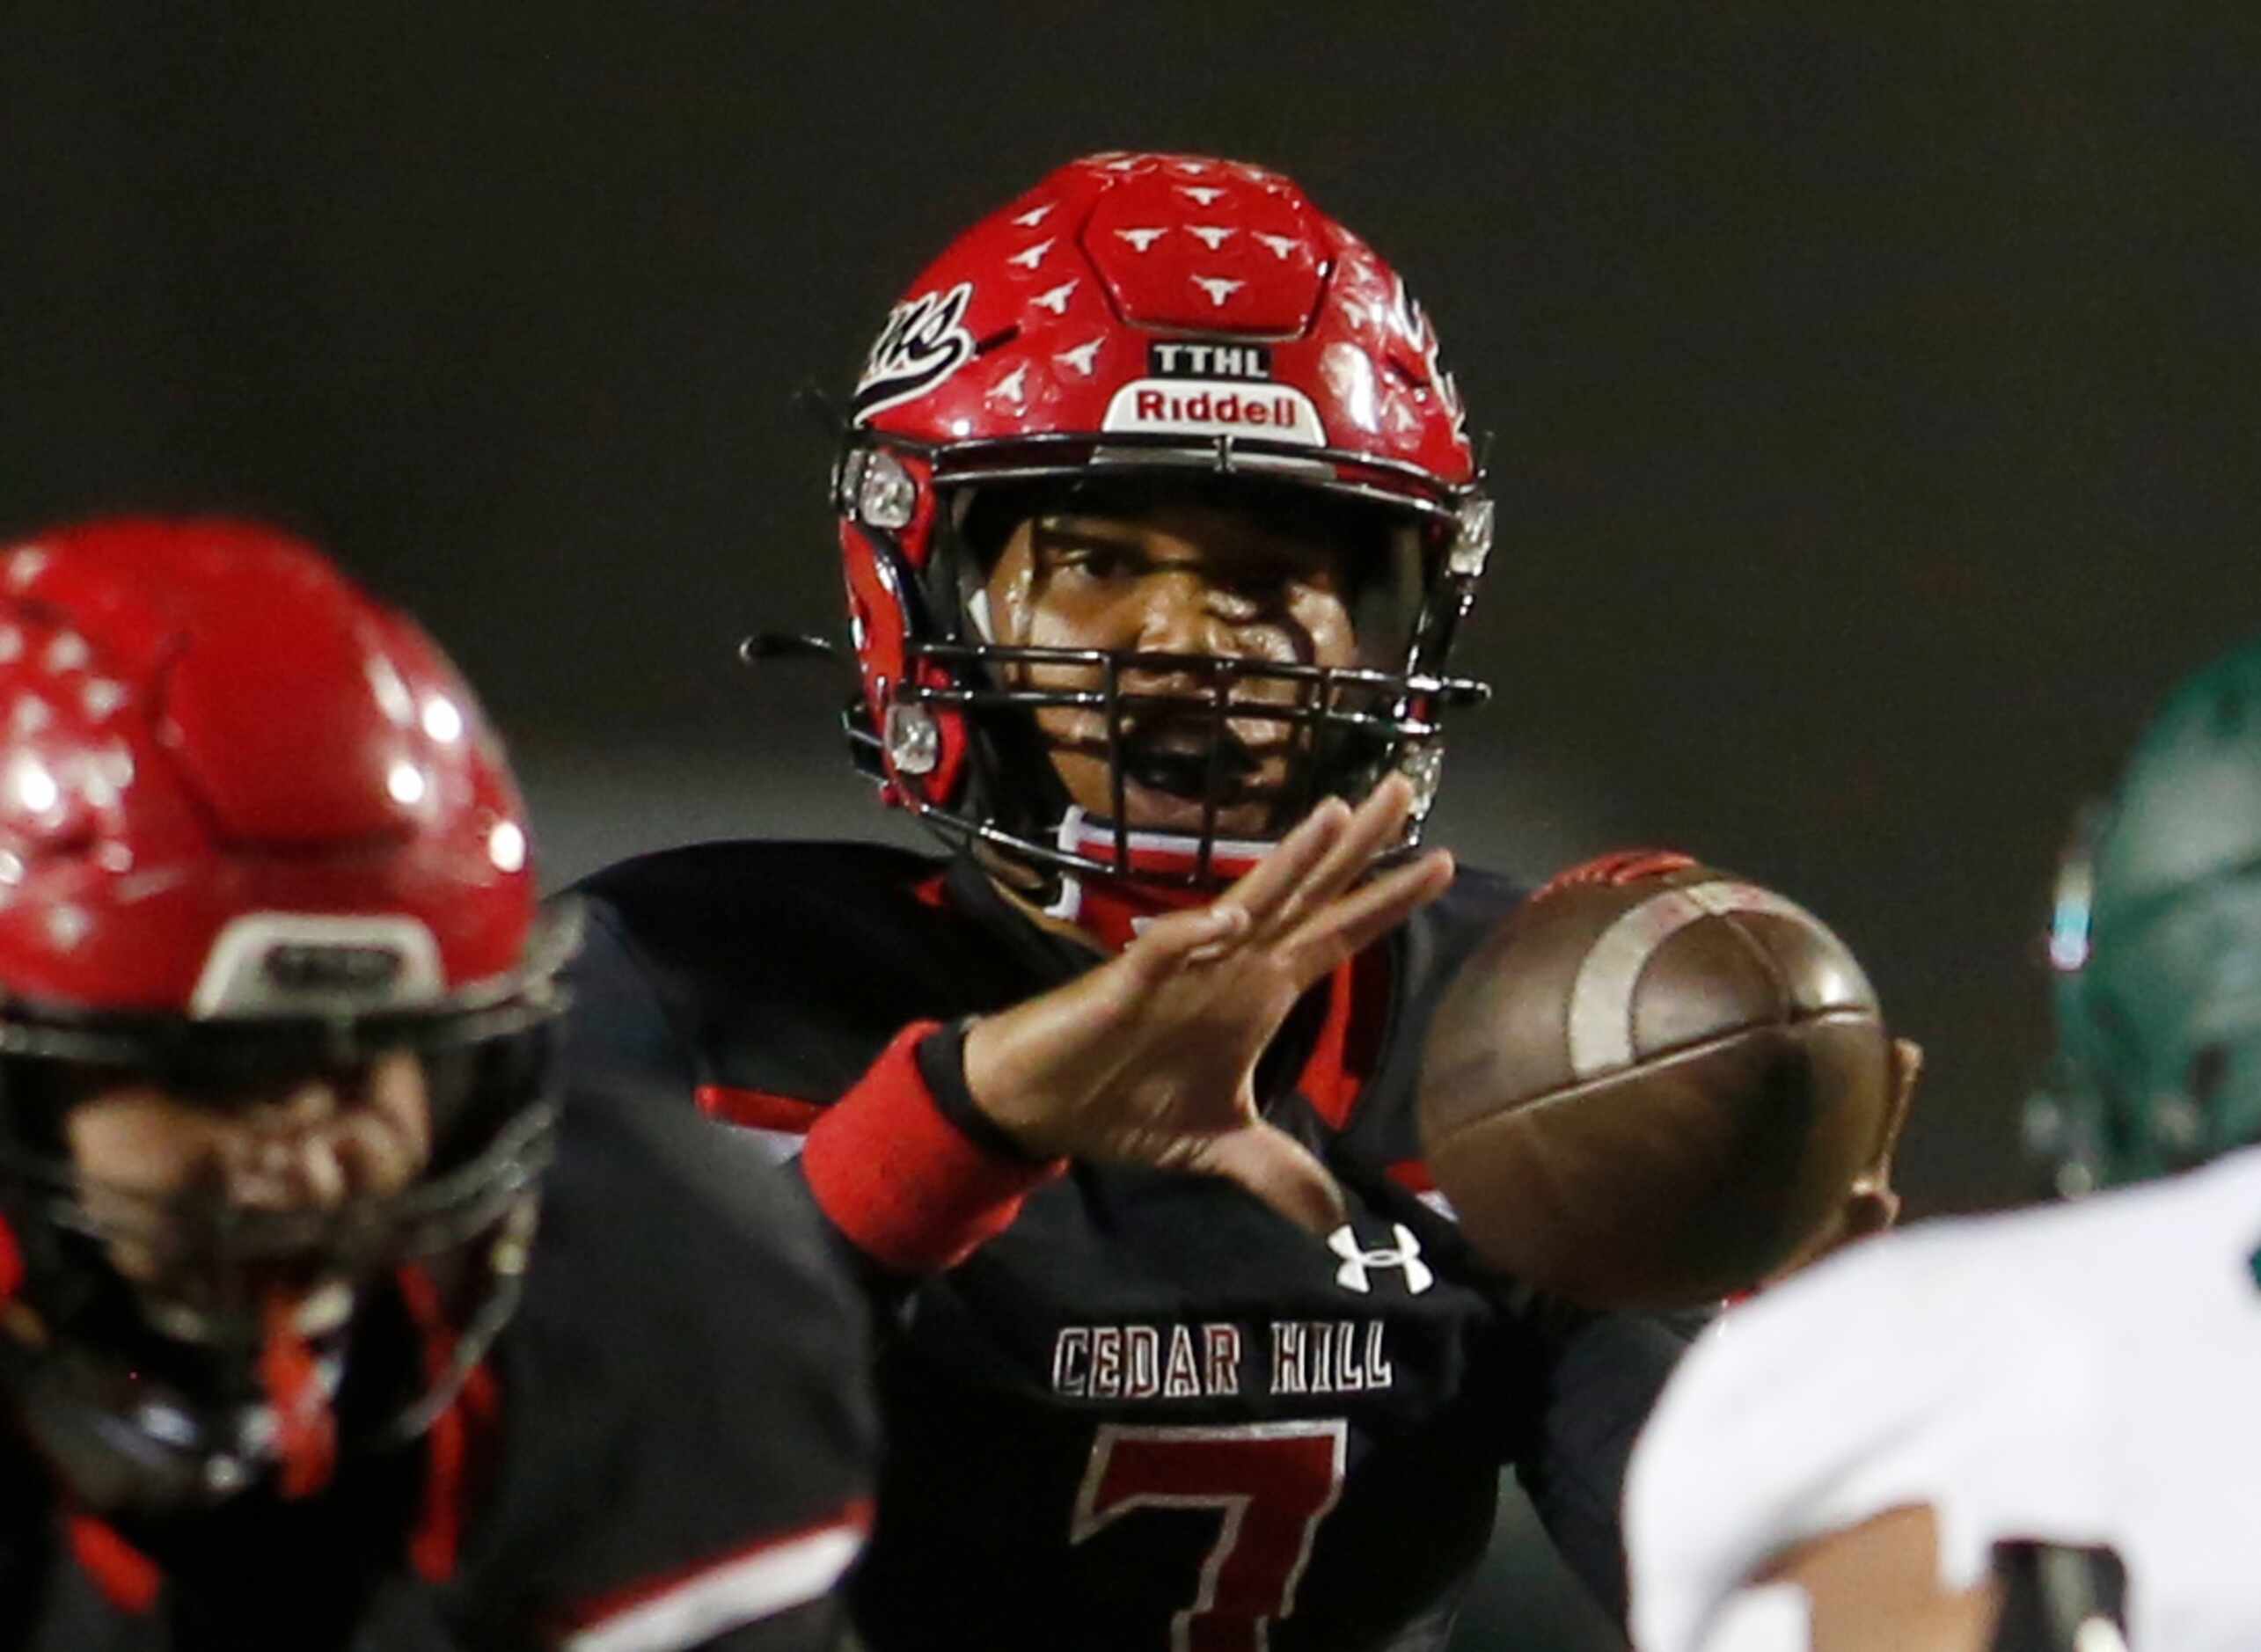 Cedar Hill quarterback Kaidon Salter (7) tales the snap during an offensive drive during the...